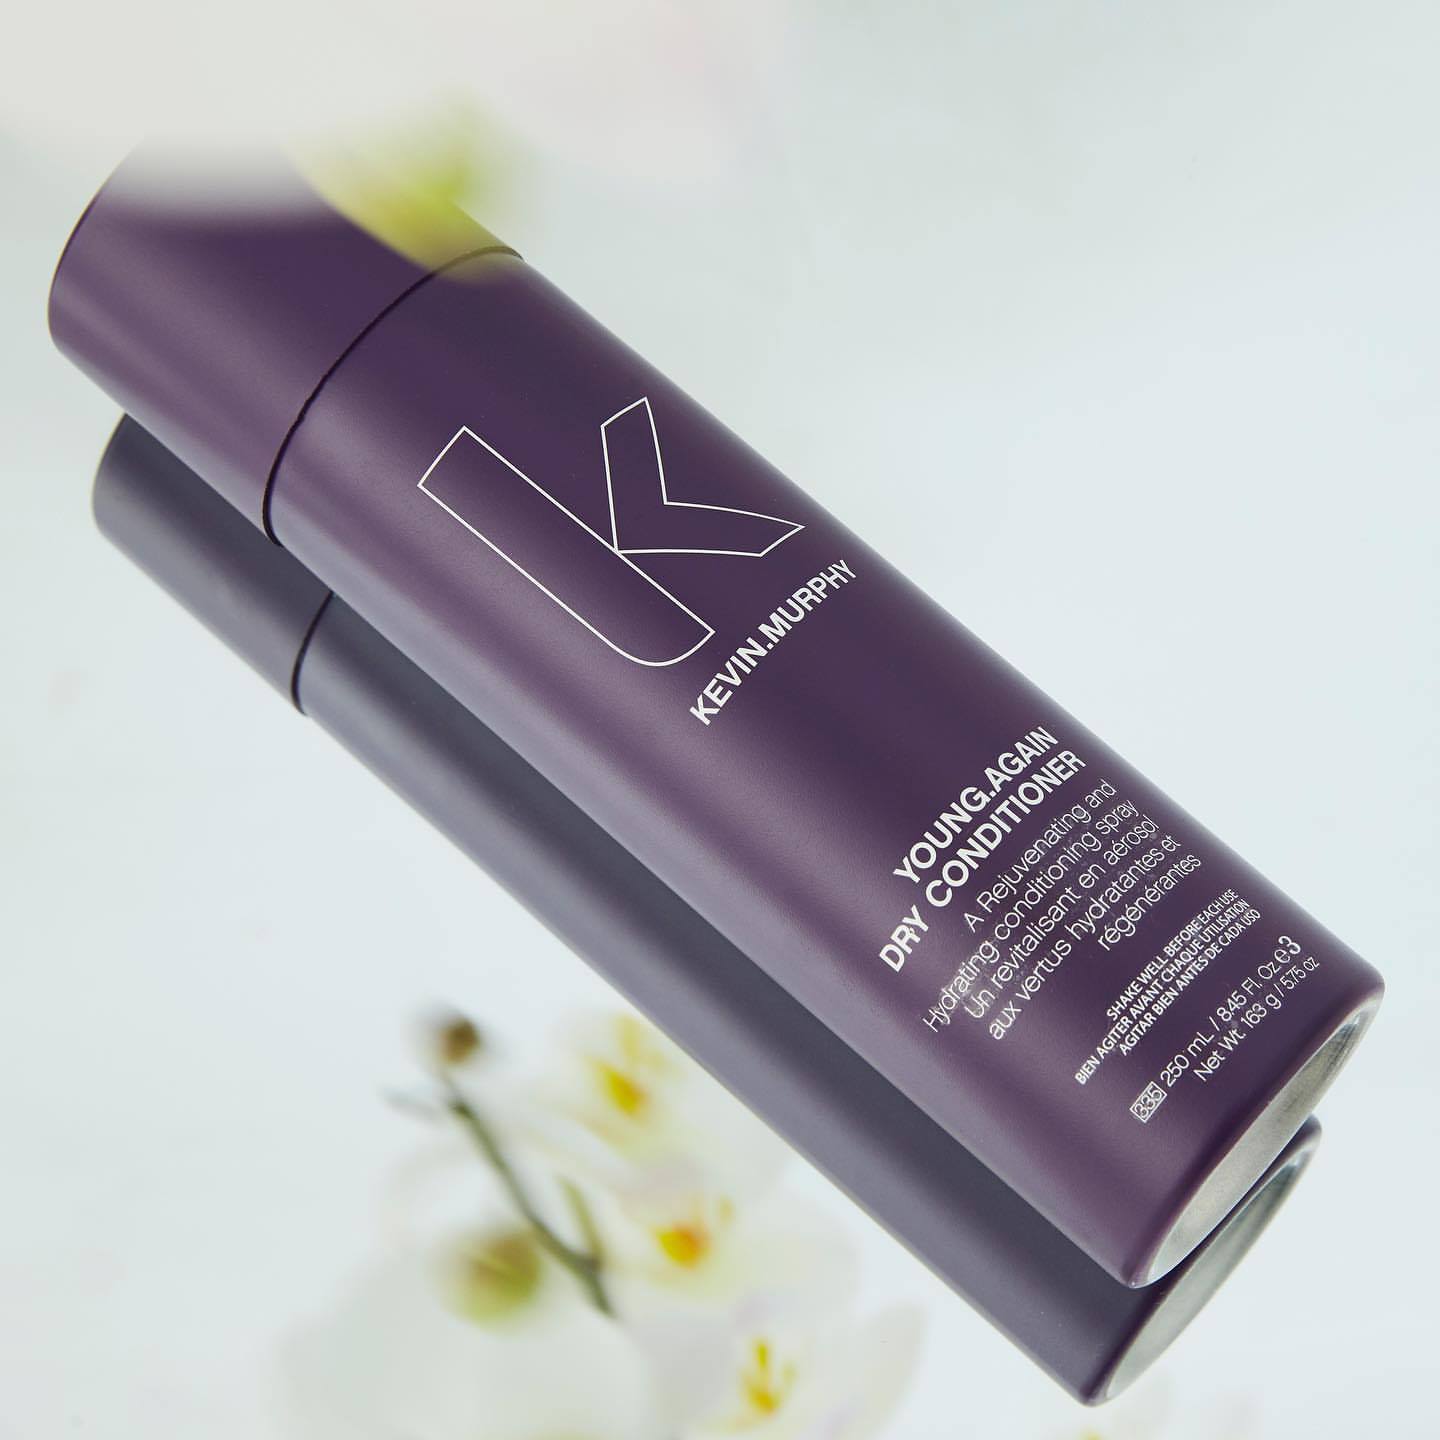 Kevin Murphy | YOUNG.AGAIN 250 ML